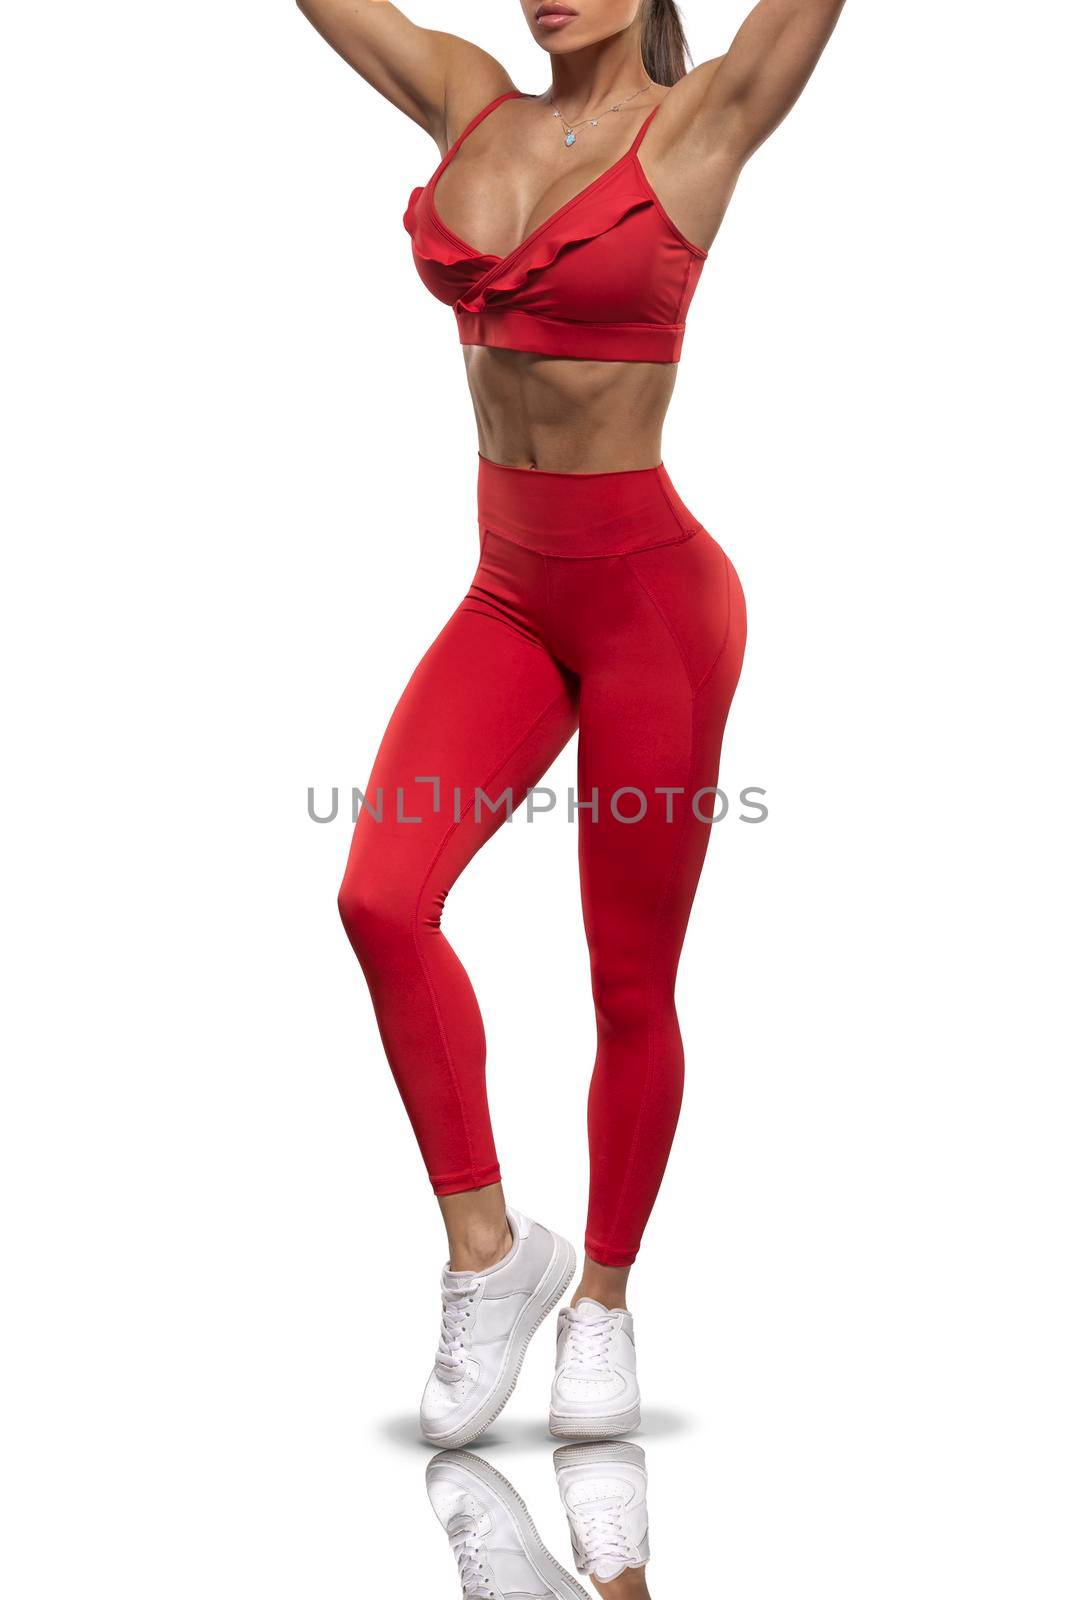 legs brunette girl in red leggings and a top on a white background